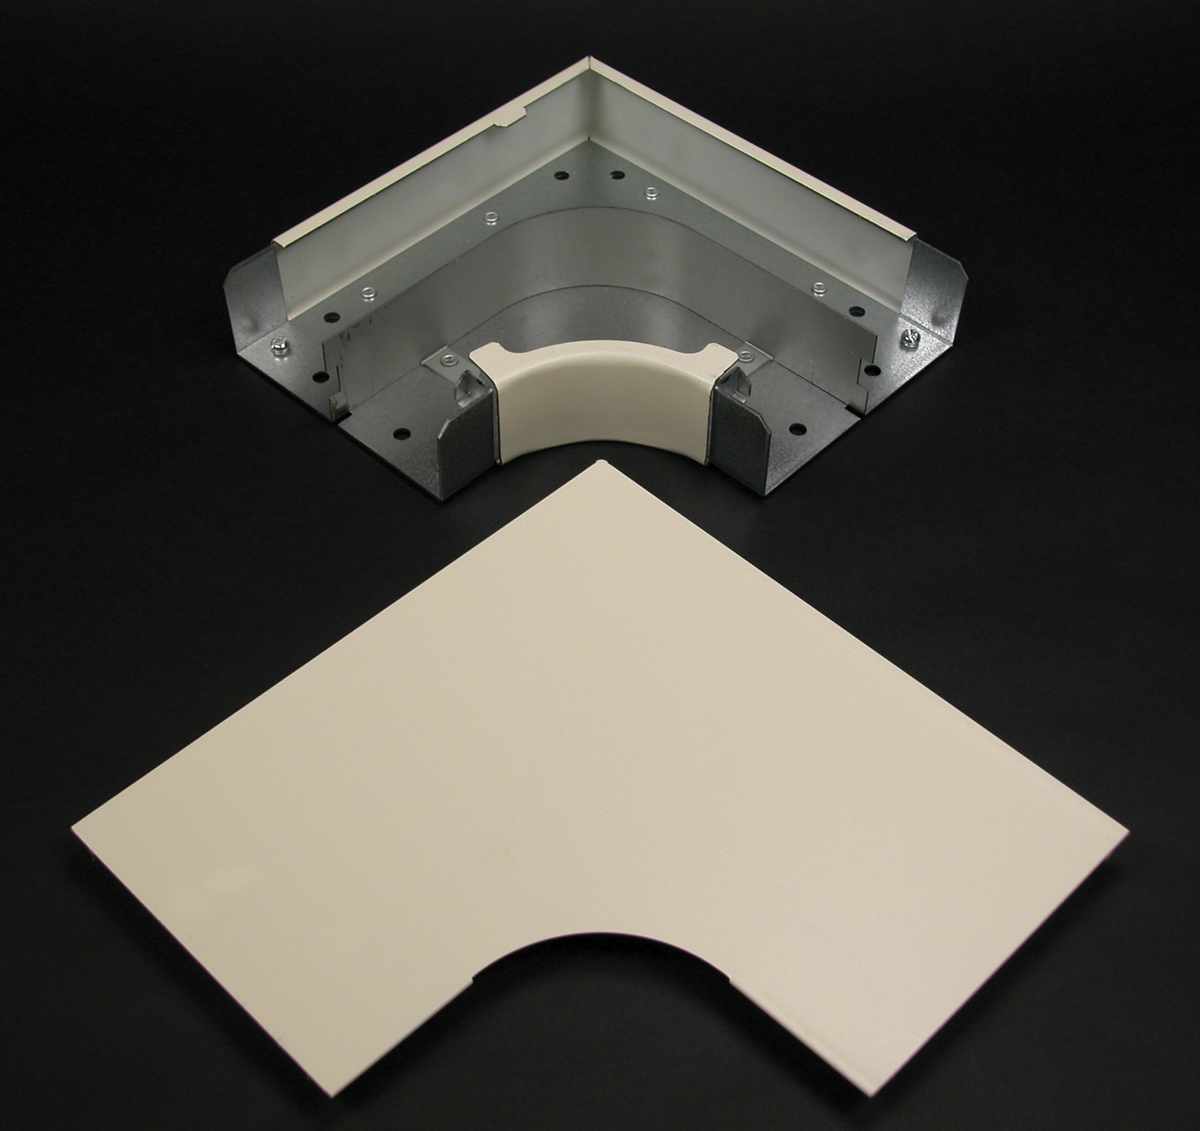 Full capacity 90 degree flat corner used in divided or undivided applications. Provides 2" (51mm) bend radius control for UTP, STP and fiber optic installations. Ideal for new installation when the cable is lay-in or pull-through. Ivory